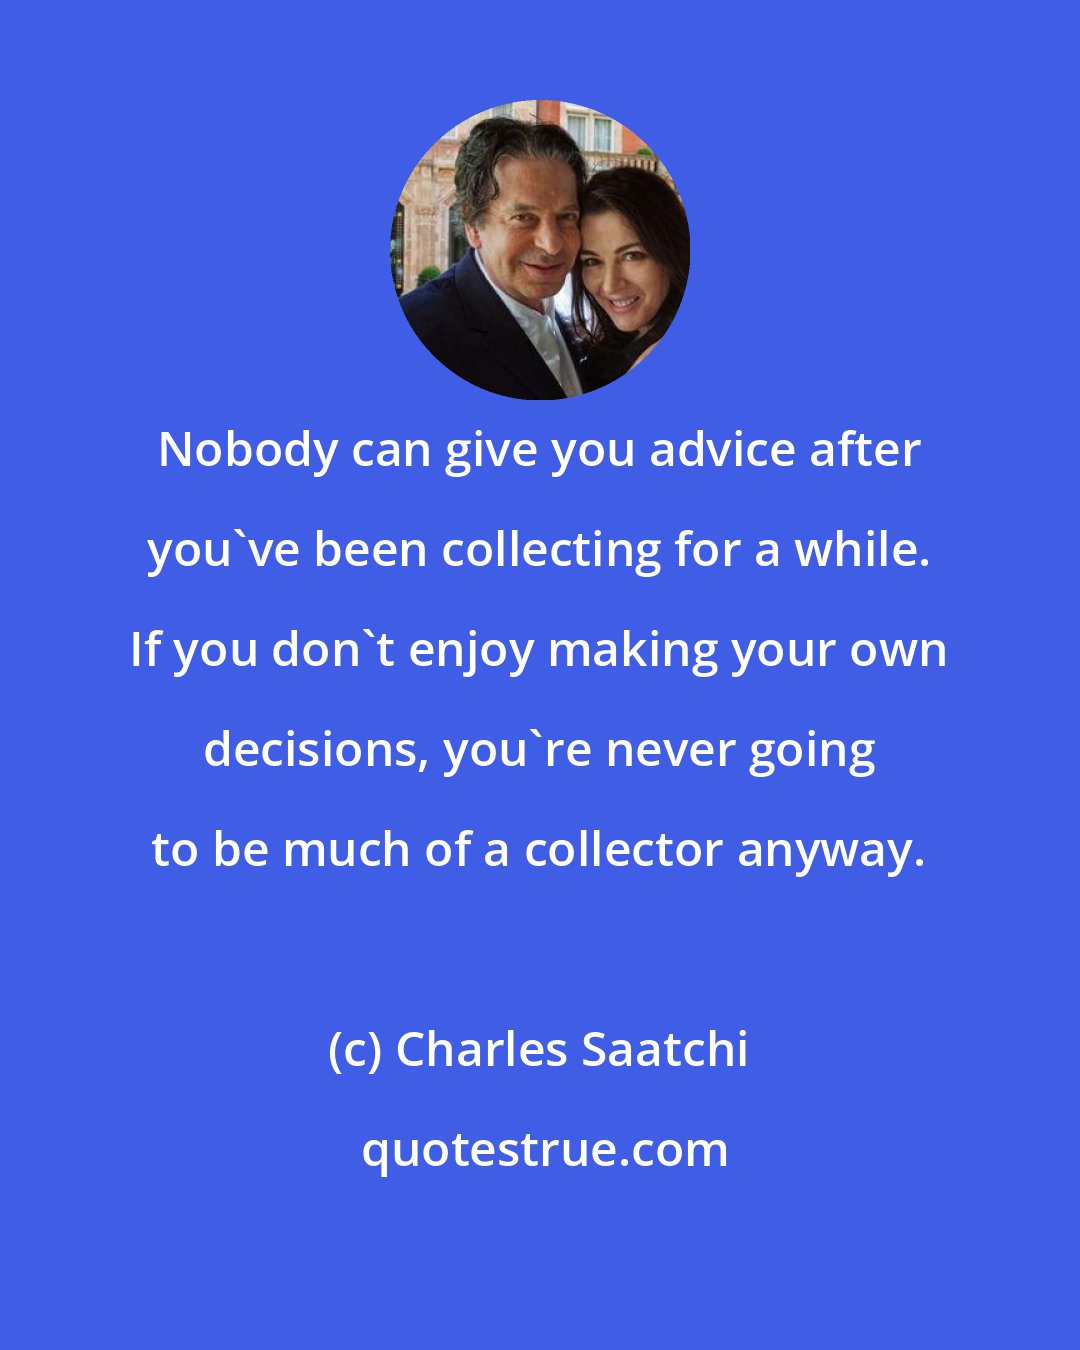 Charles Saatchi: Nobody can give you advice after you've been collecting for a while. If you don't enjoy making your own decisions, you're never going to be much of a collector anyway.